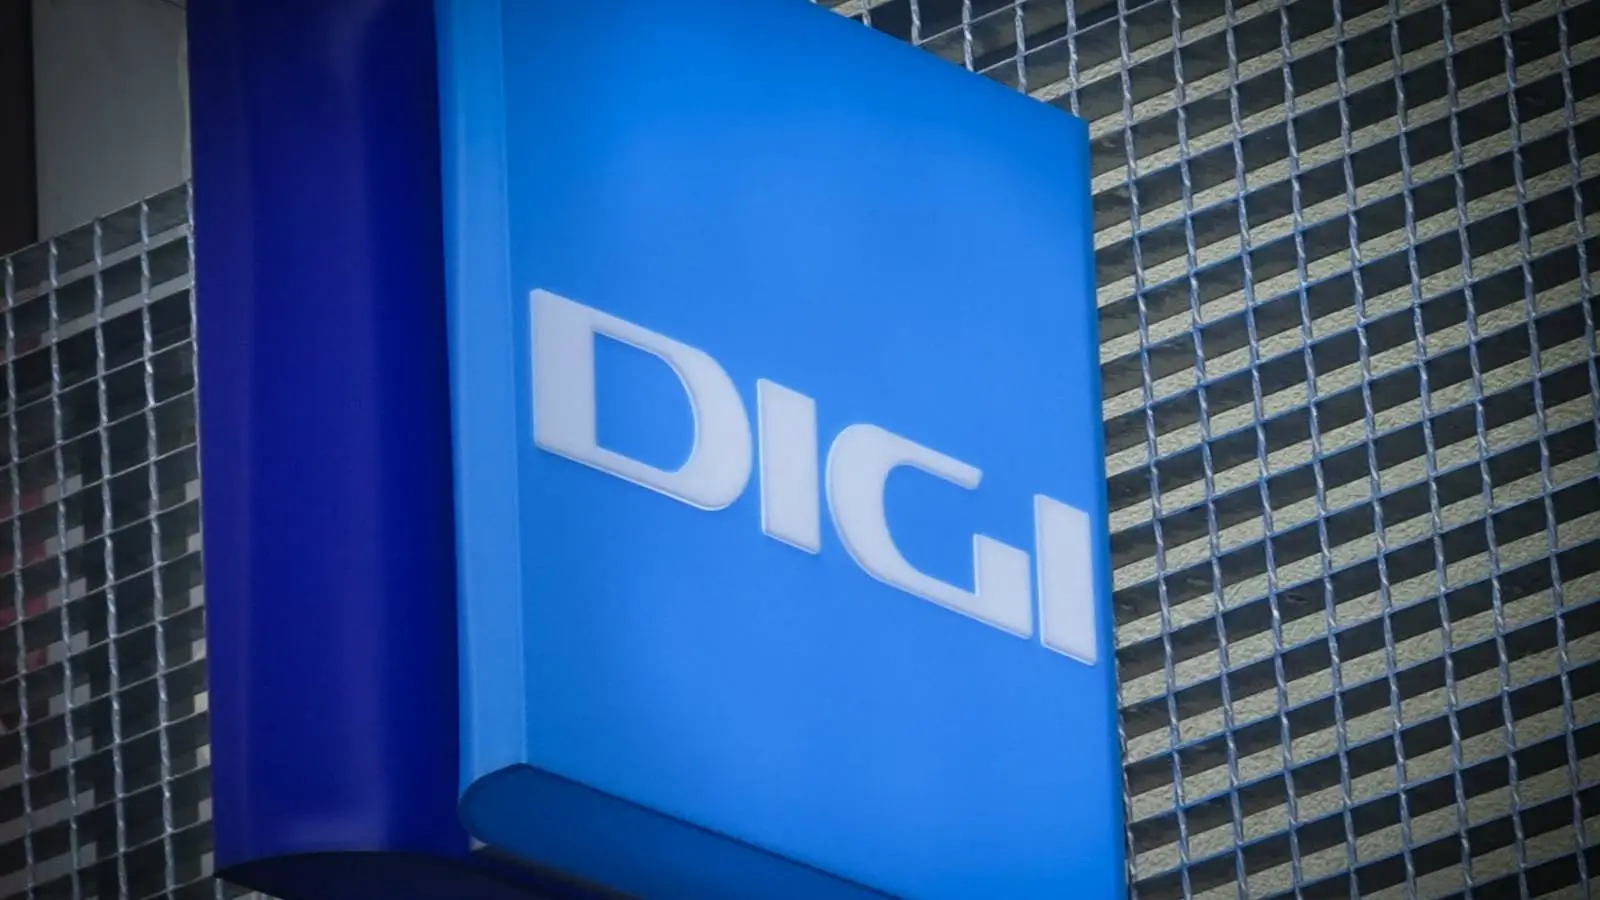 DIGI Mobil GREAT News Announced MILLIONS of Romanian Customers